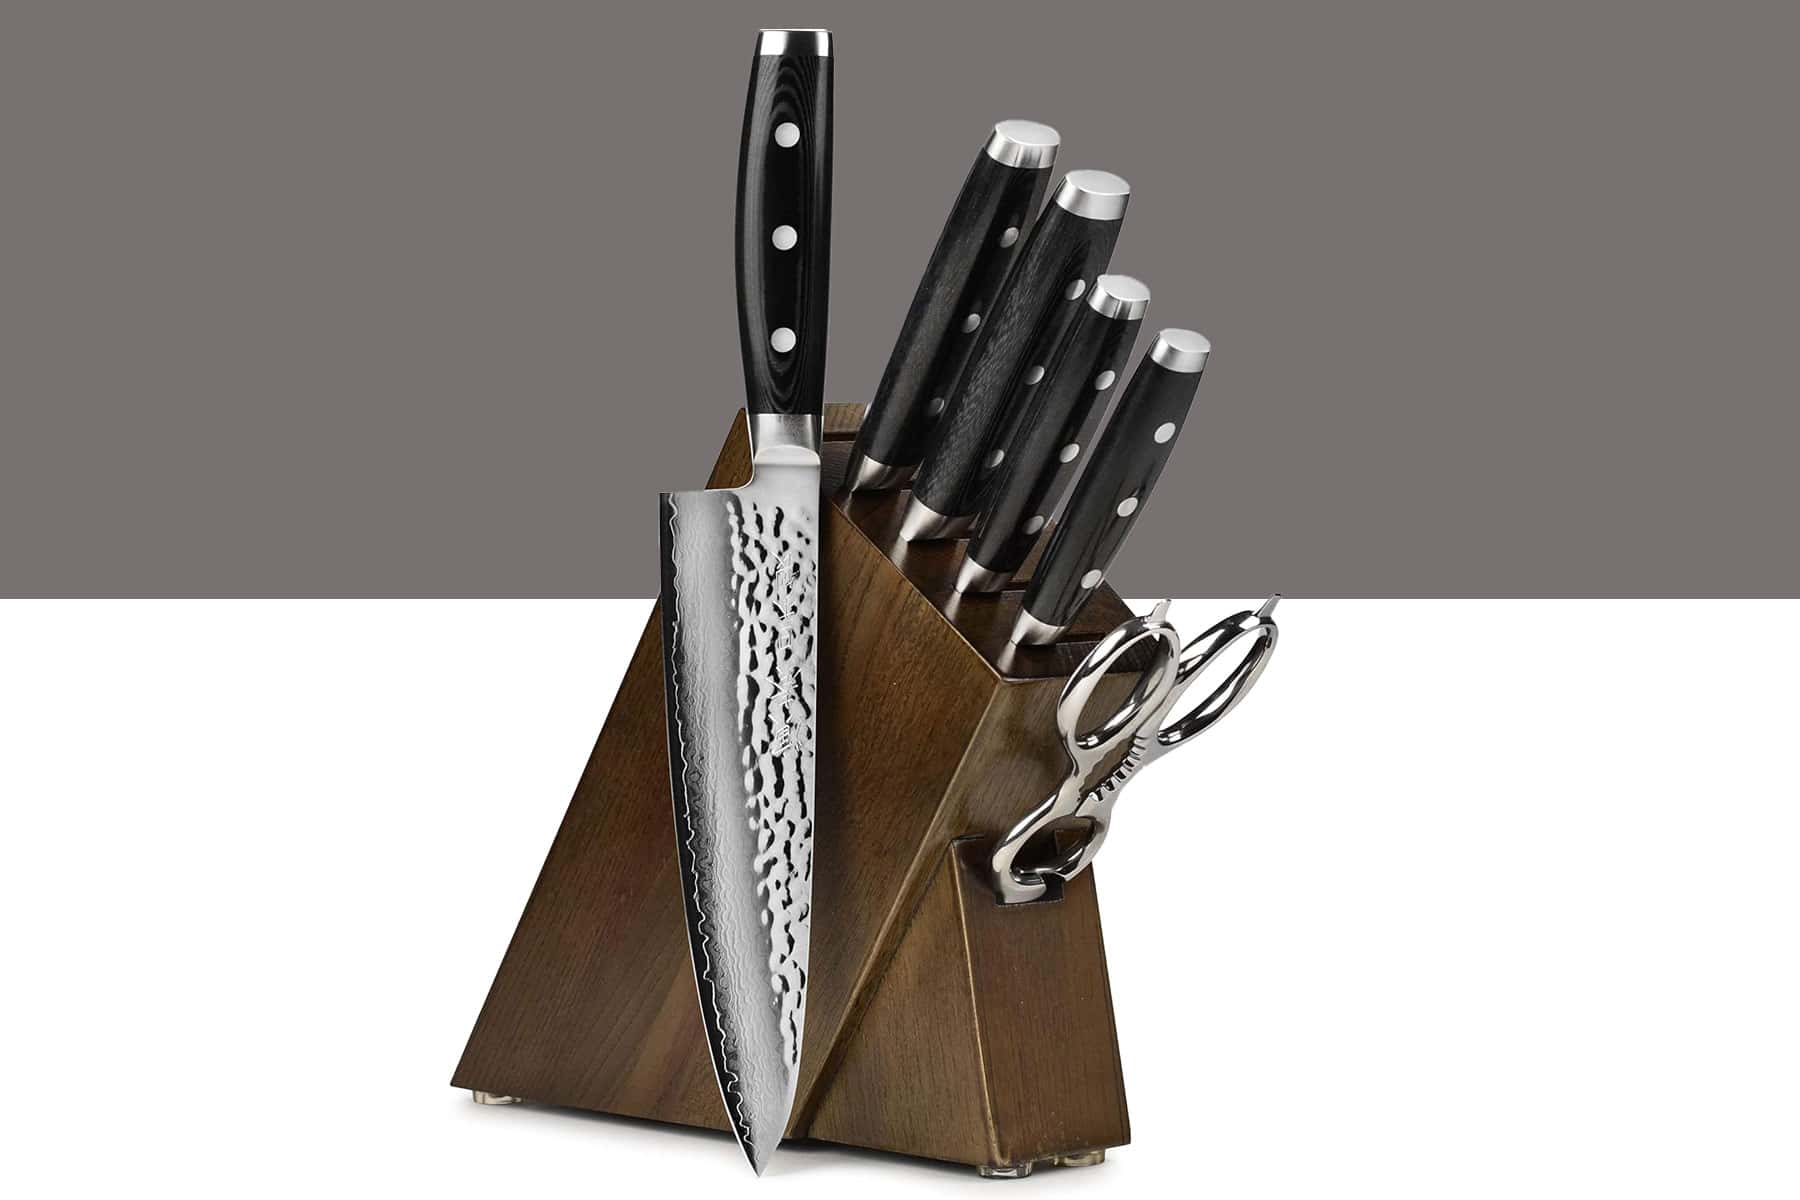 The Enso HD Japanese Kitchen Knife set shown here with the knives inside the storage block.